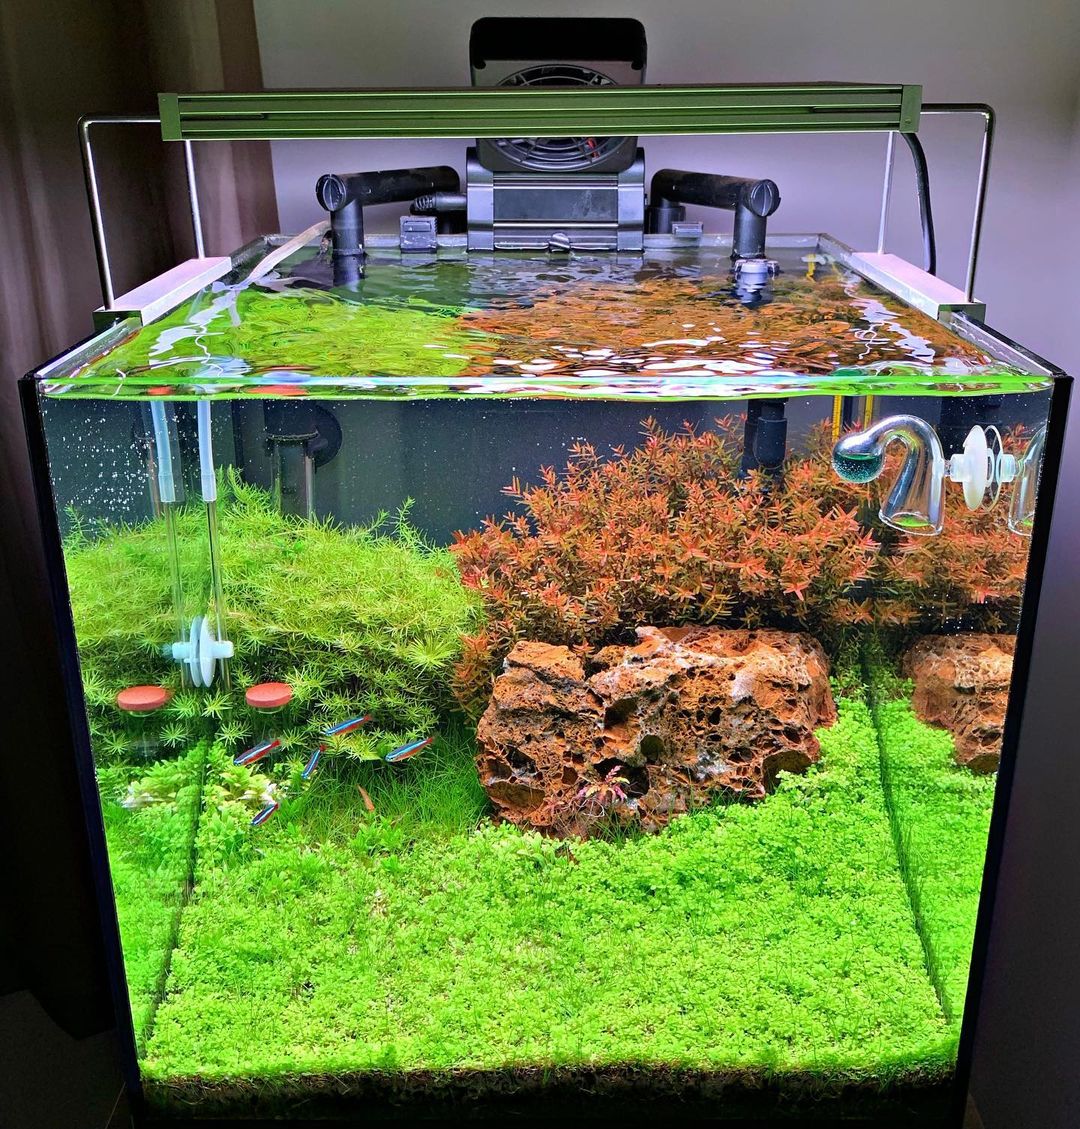 https://www.bunnycart.com/blog/wp-content/uploads/2021/09/Types-of-Fish-Tanks-Which-One-is-the-Best-for-You.jpg